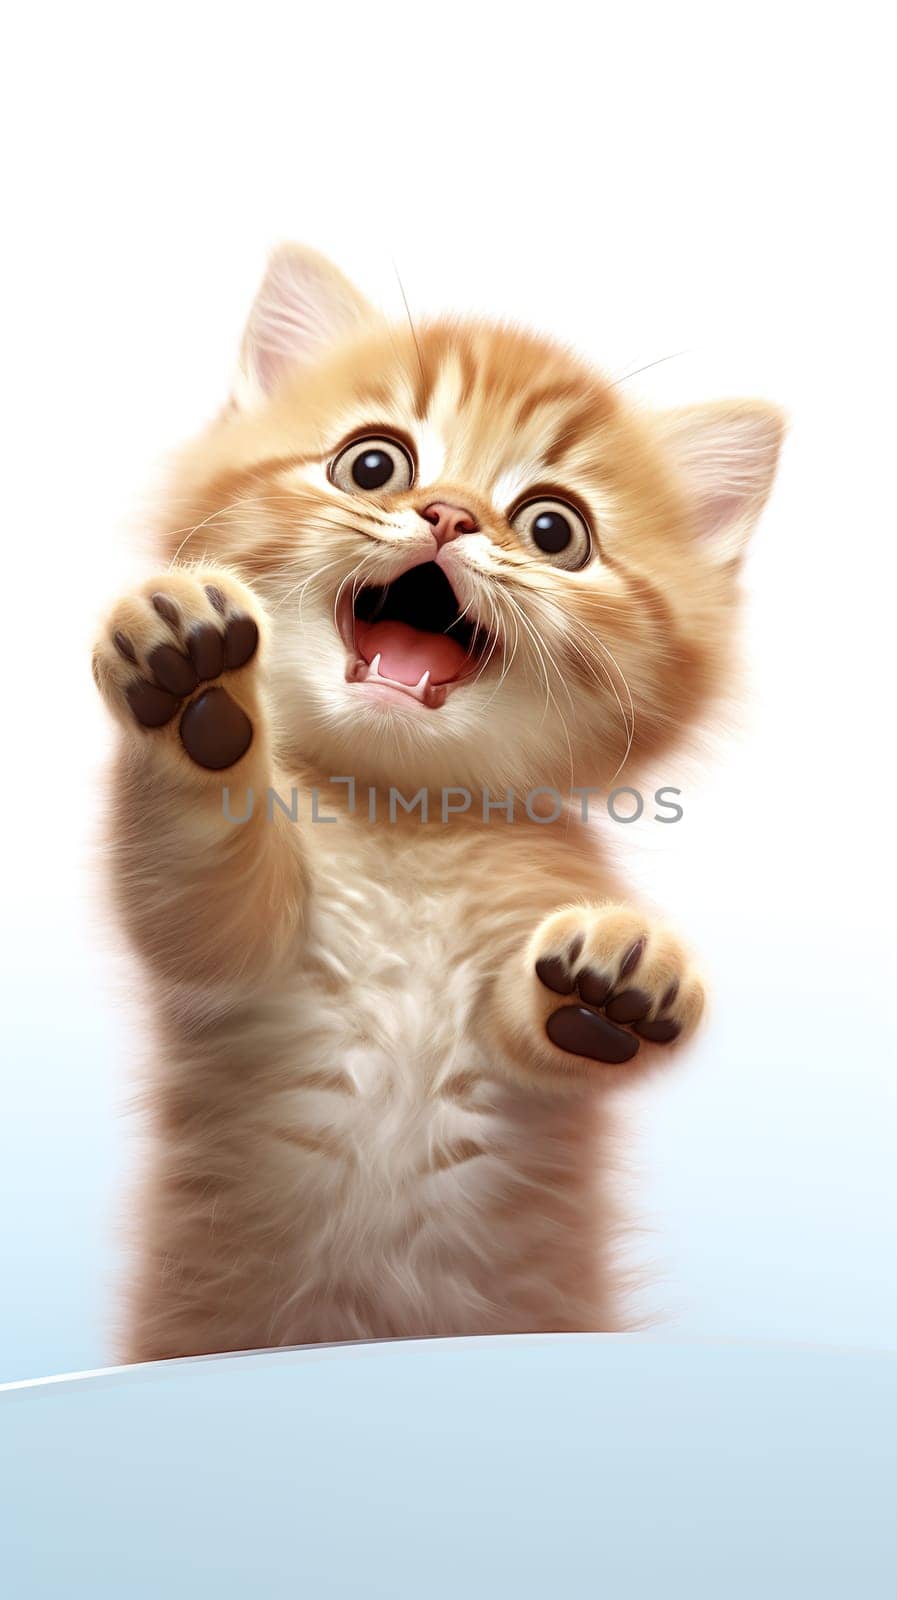 Cute kitten with open mouth, meowing for attention by chrisroll